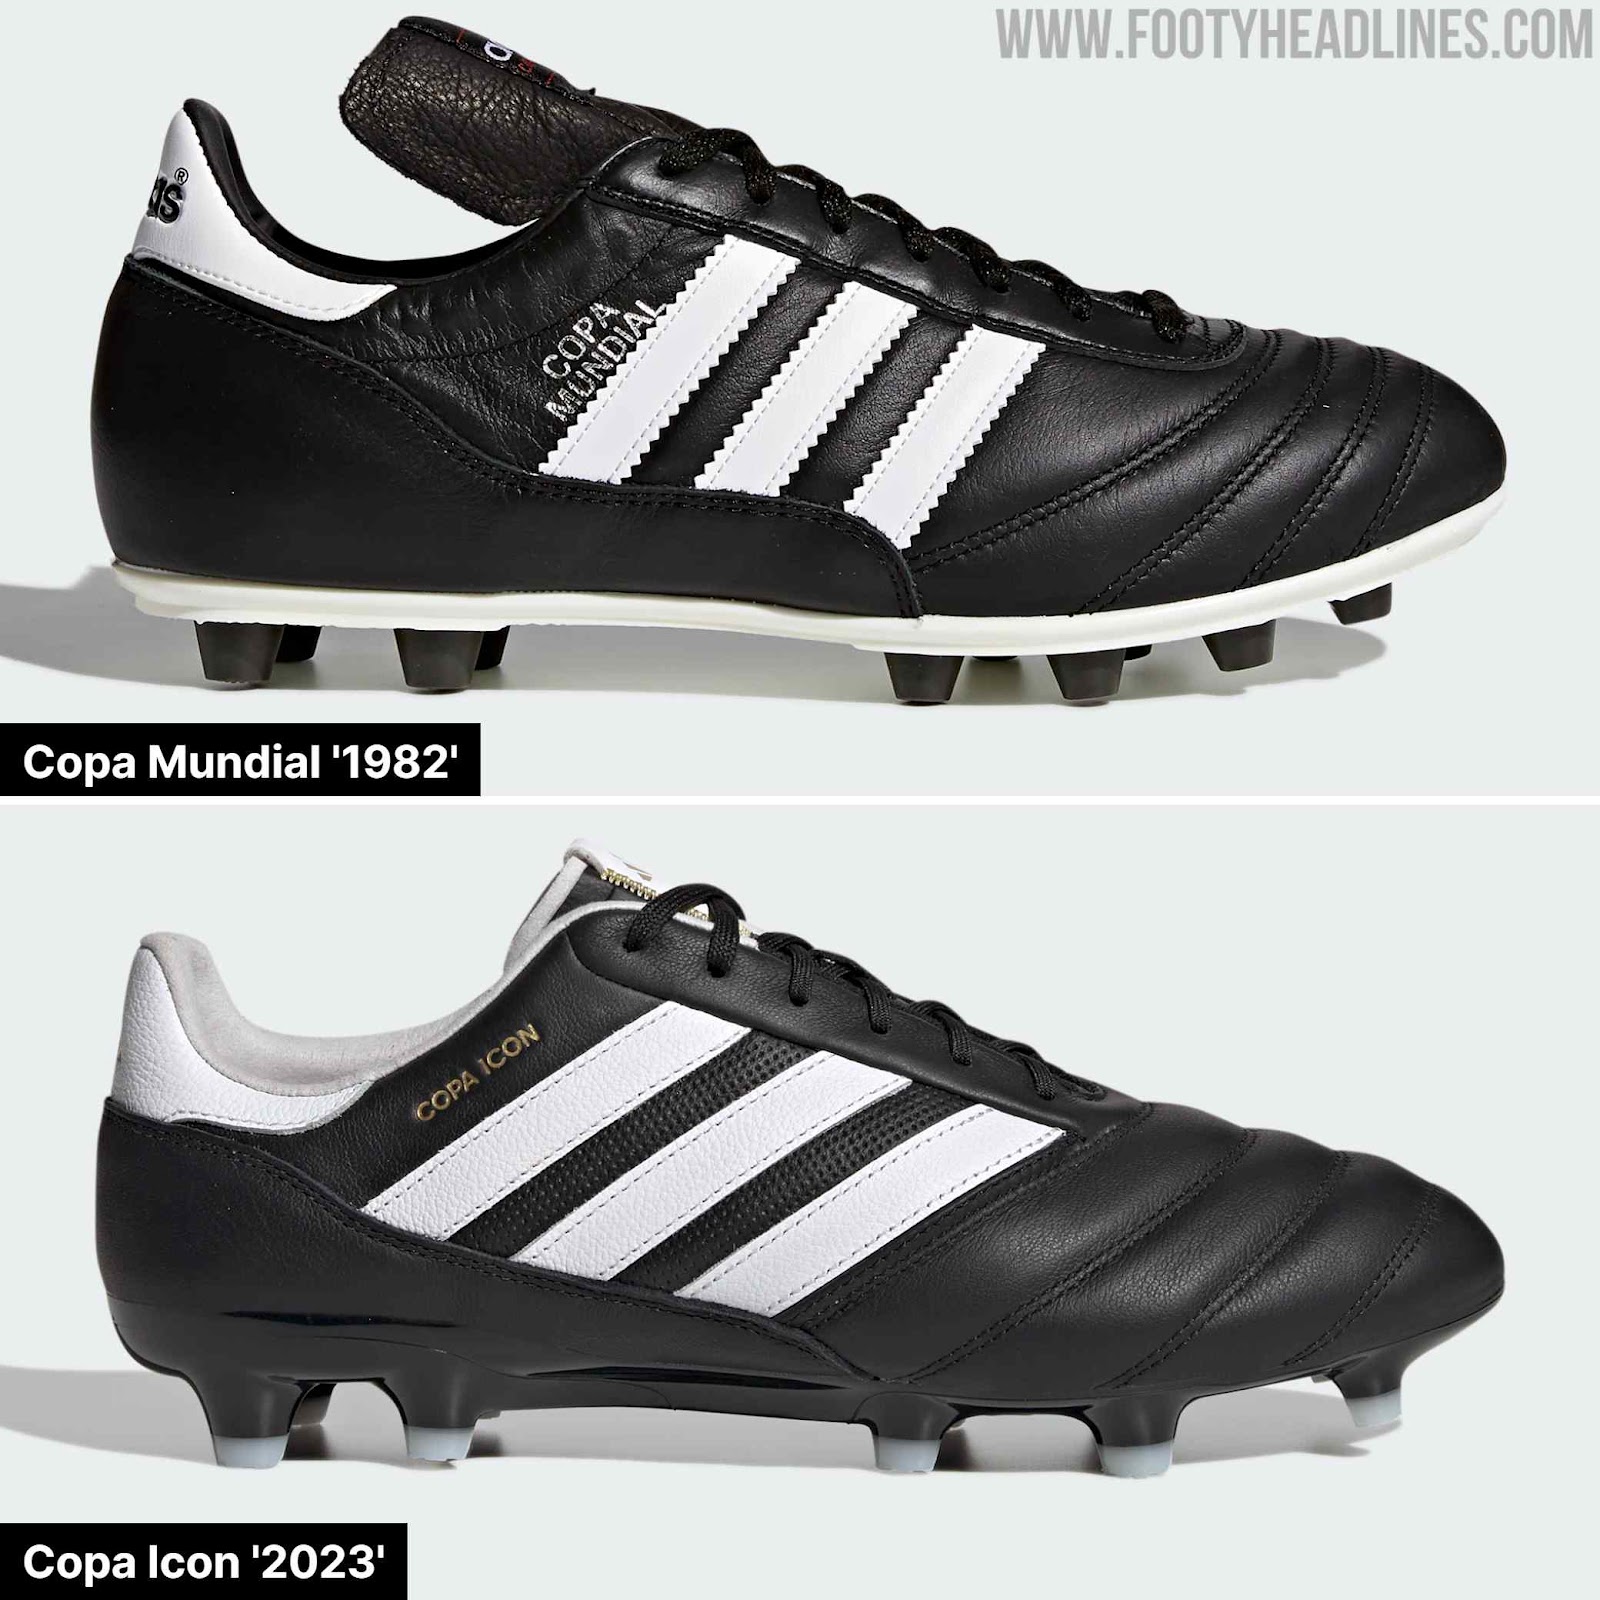 2023 Copa All-New Adidas Copa Icon 2023 Boots Released Footy Headlines